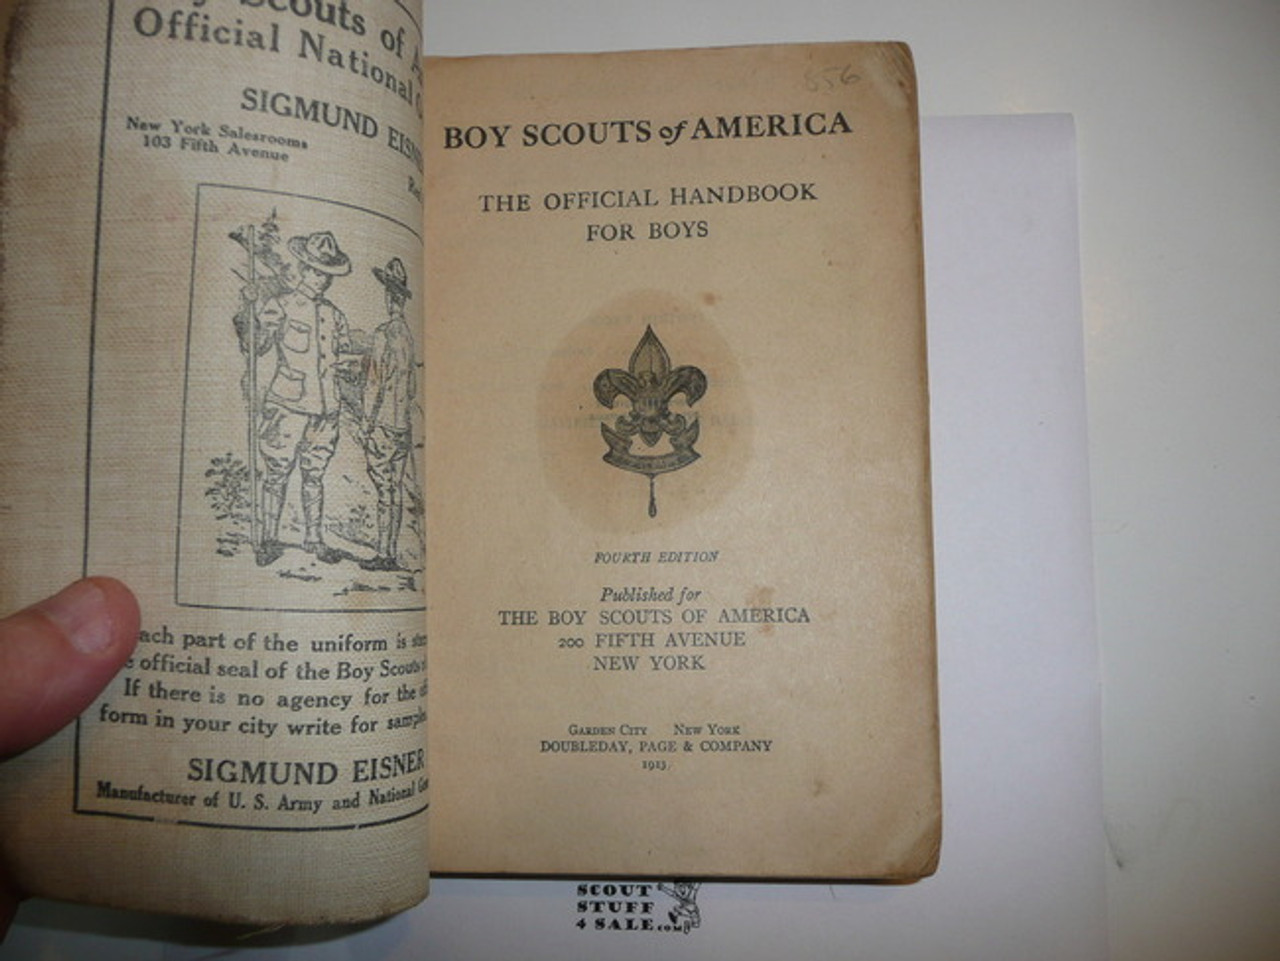 1913 Boy Scout Handbook, First Edition, Fourth Printing, printed "Fourth Edition" on title page, spine and cover wear